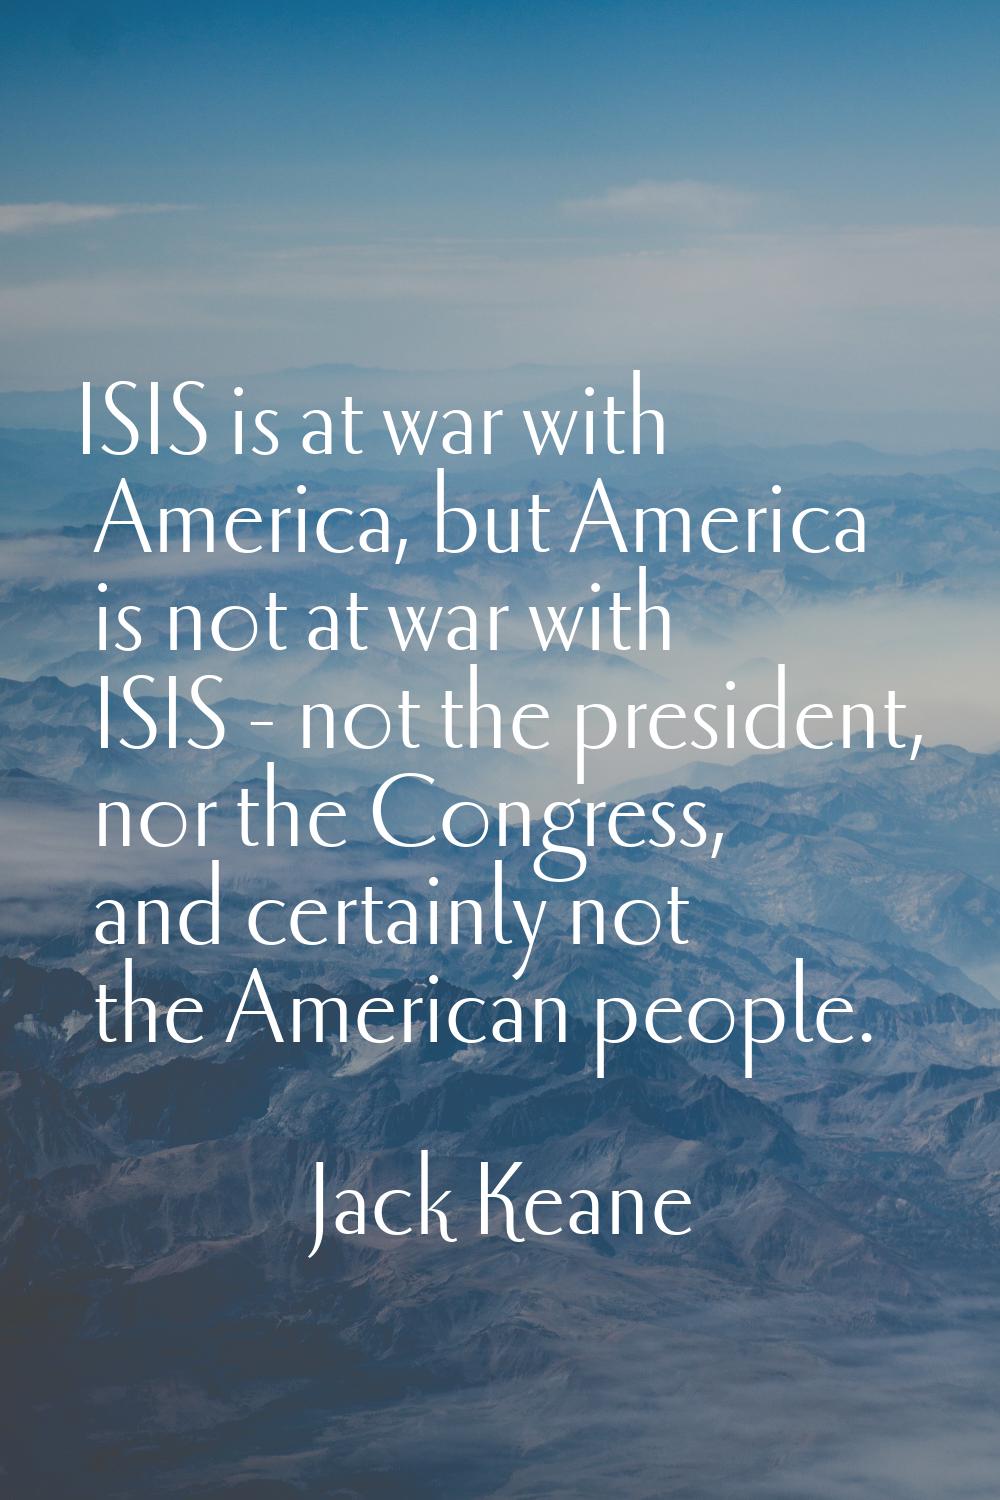 ISIS is at war with America, but America is not at war with ISIS - not the president, nor the Congr